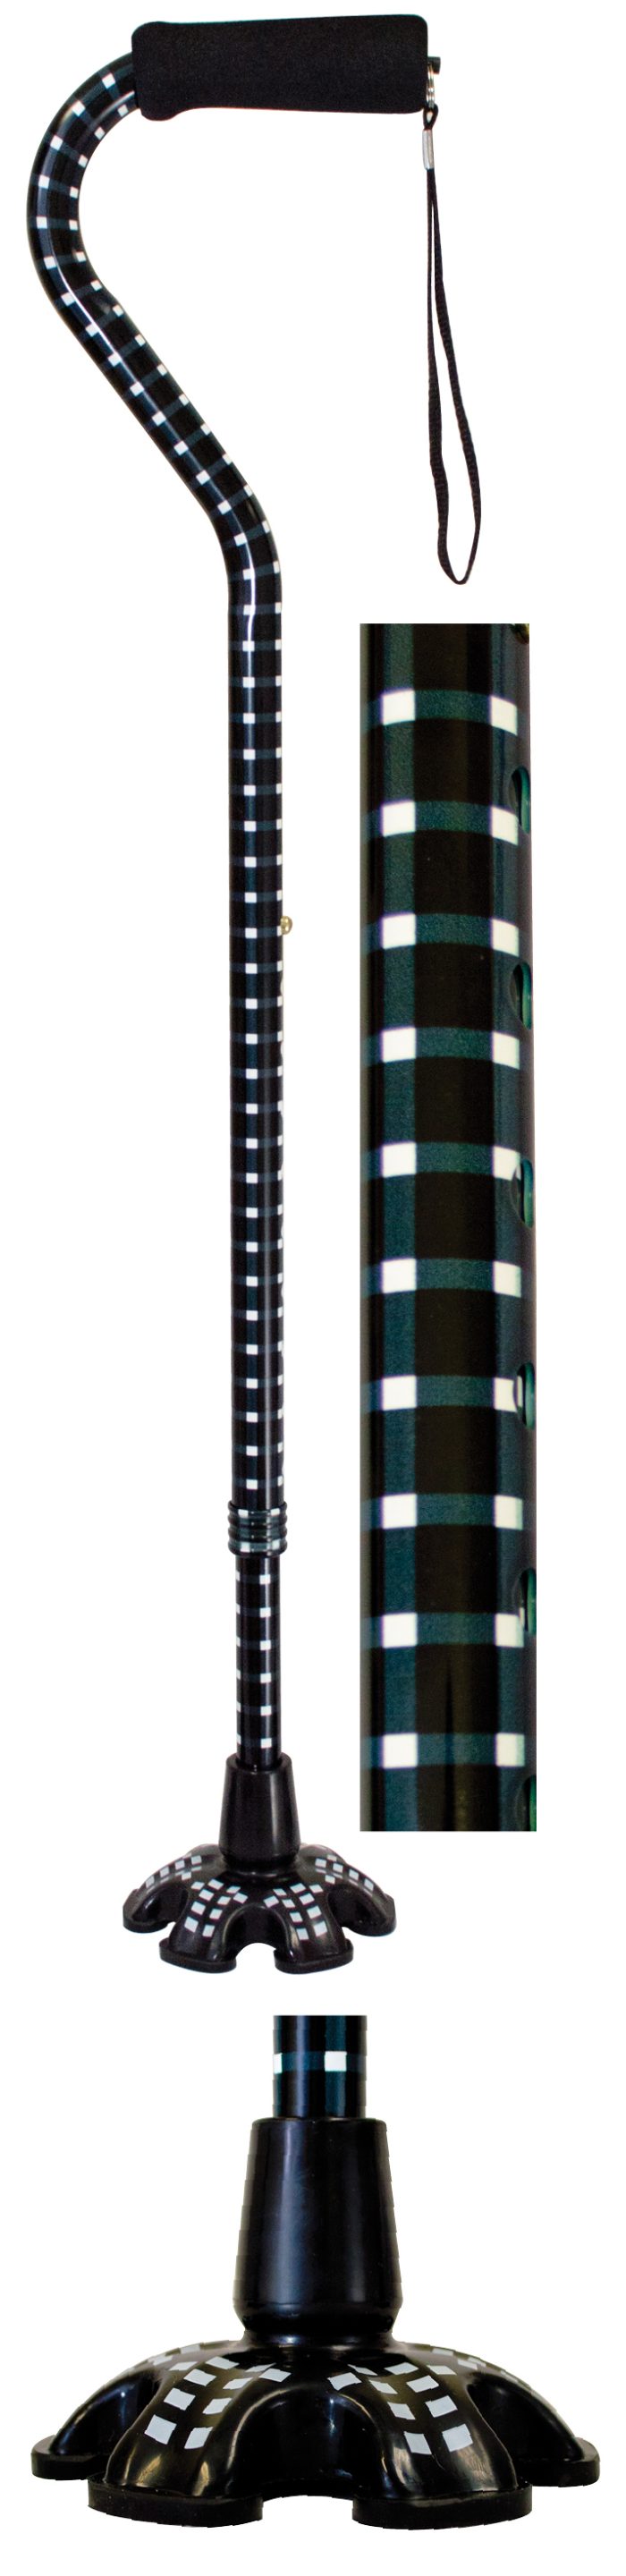 COUTURE OFFSET CANES WITH MATCHING STANDING TIPS IN HOUNDSTOOTH